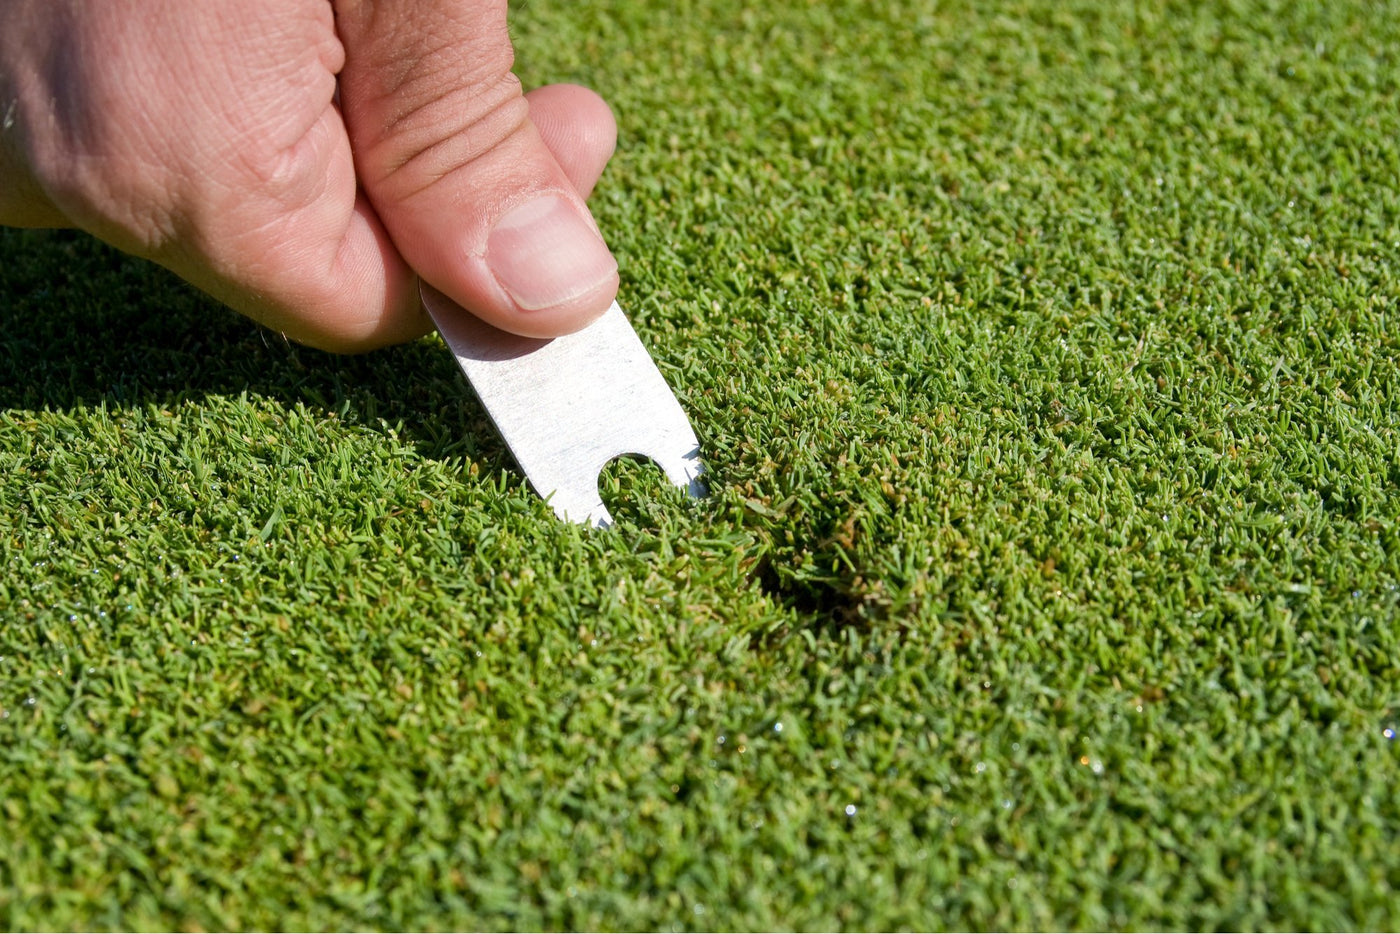  Fixing a Ball Mark on golf course